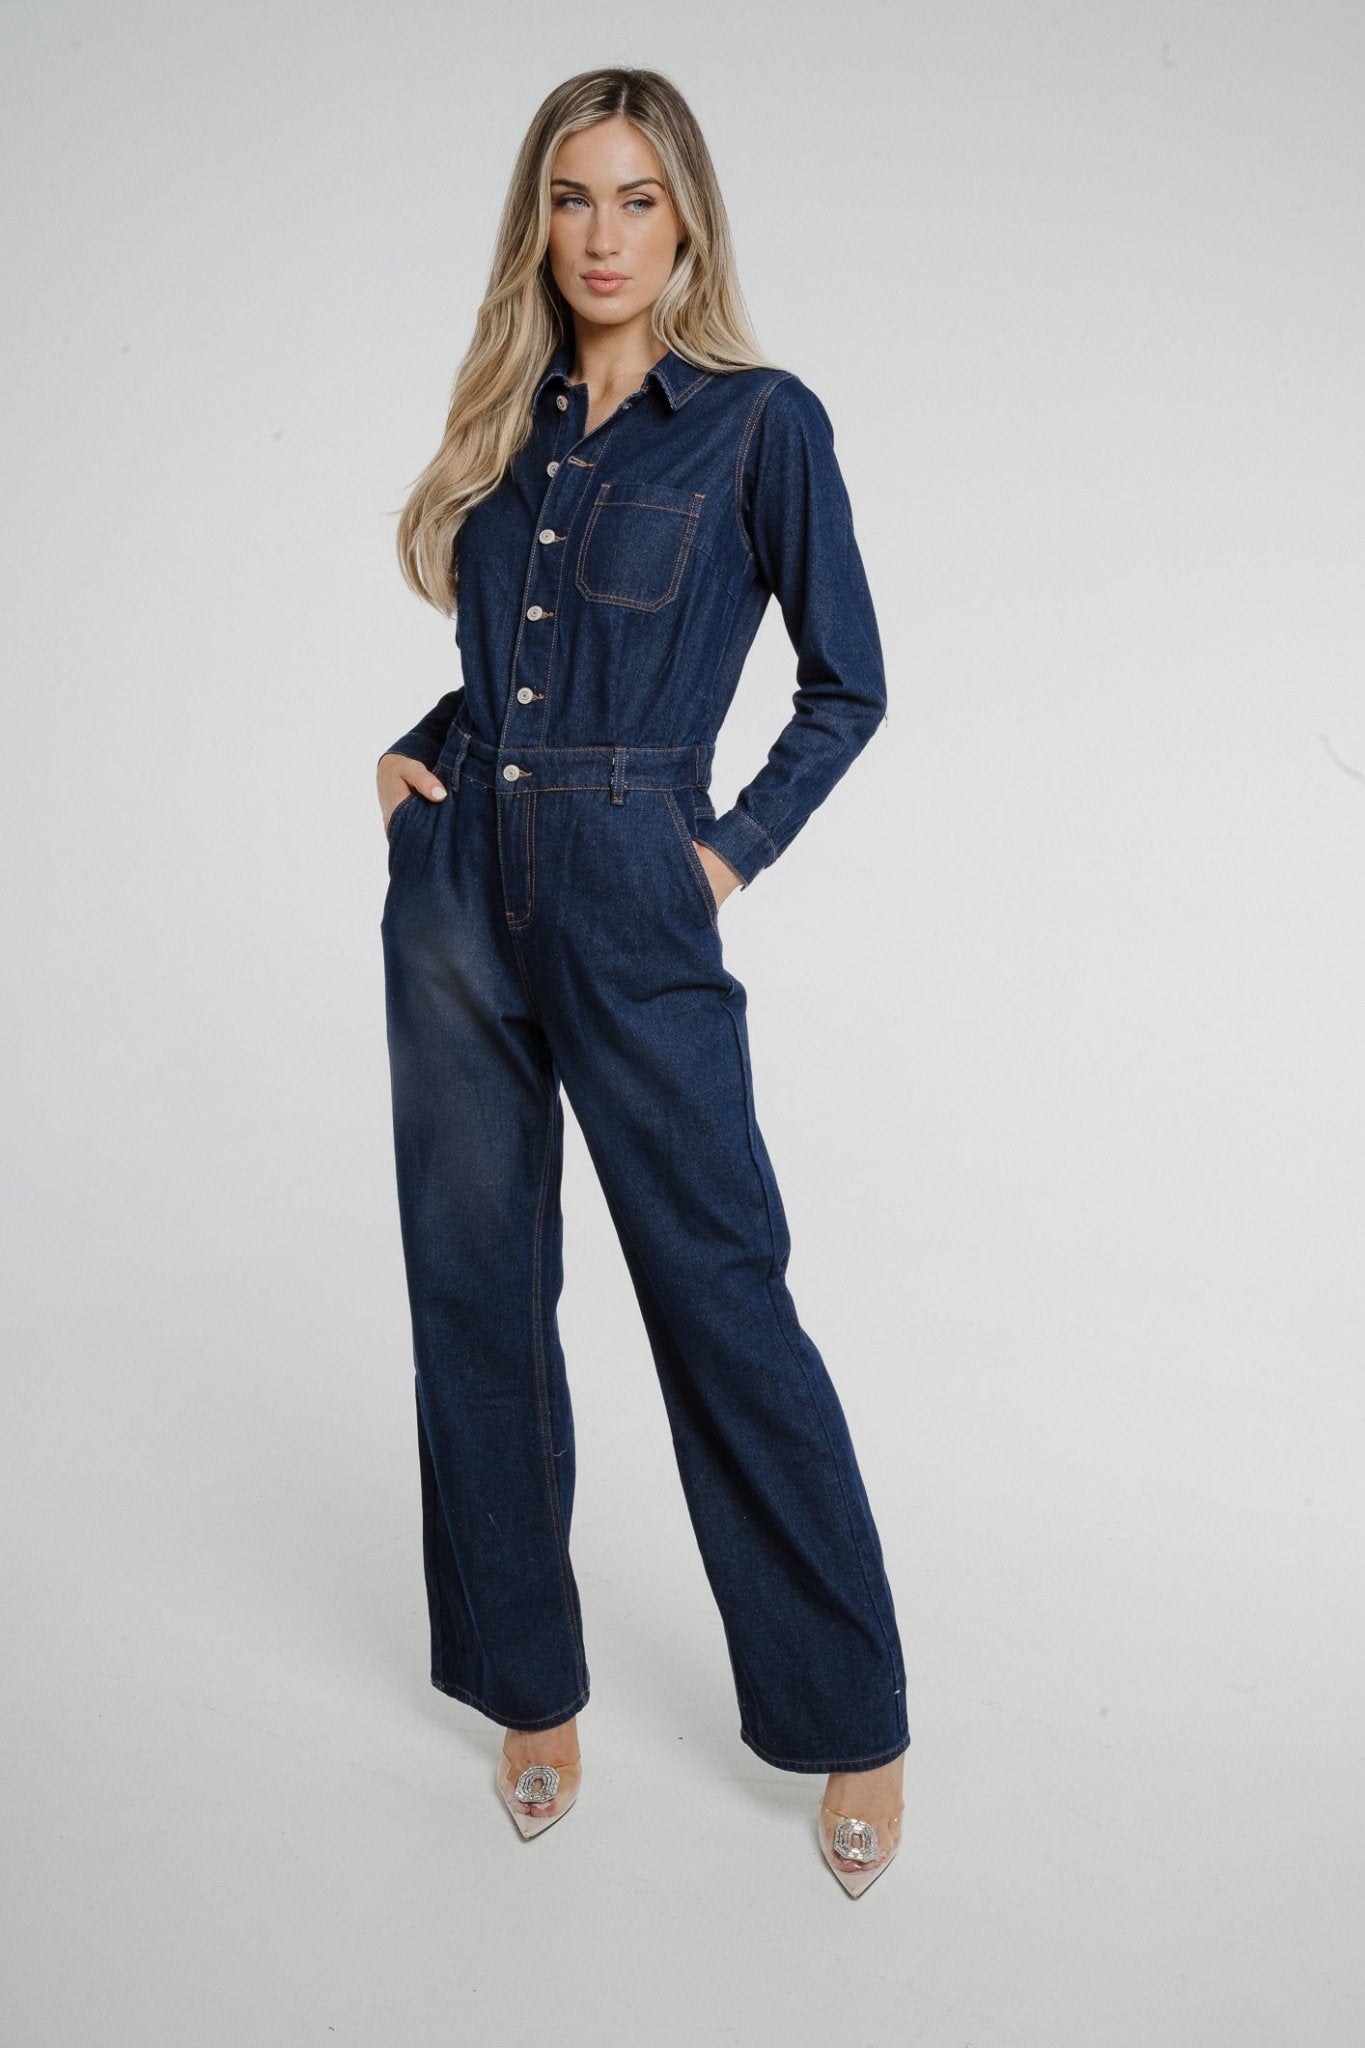 Blue Womens Denim Revice Denim Jumpsuit Sleeveless Slim Fit Playsuit For  Club Night Wear And Rompers 2017 Collection From Ugrif, $28.16 | DHgate.Com